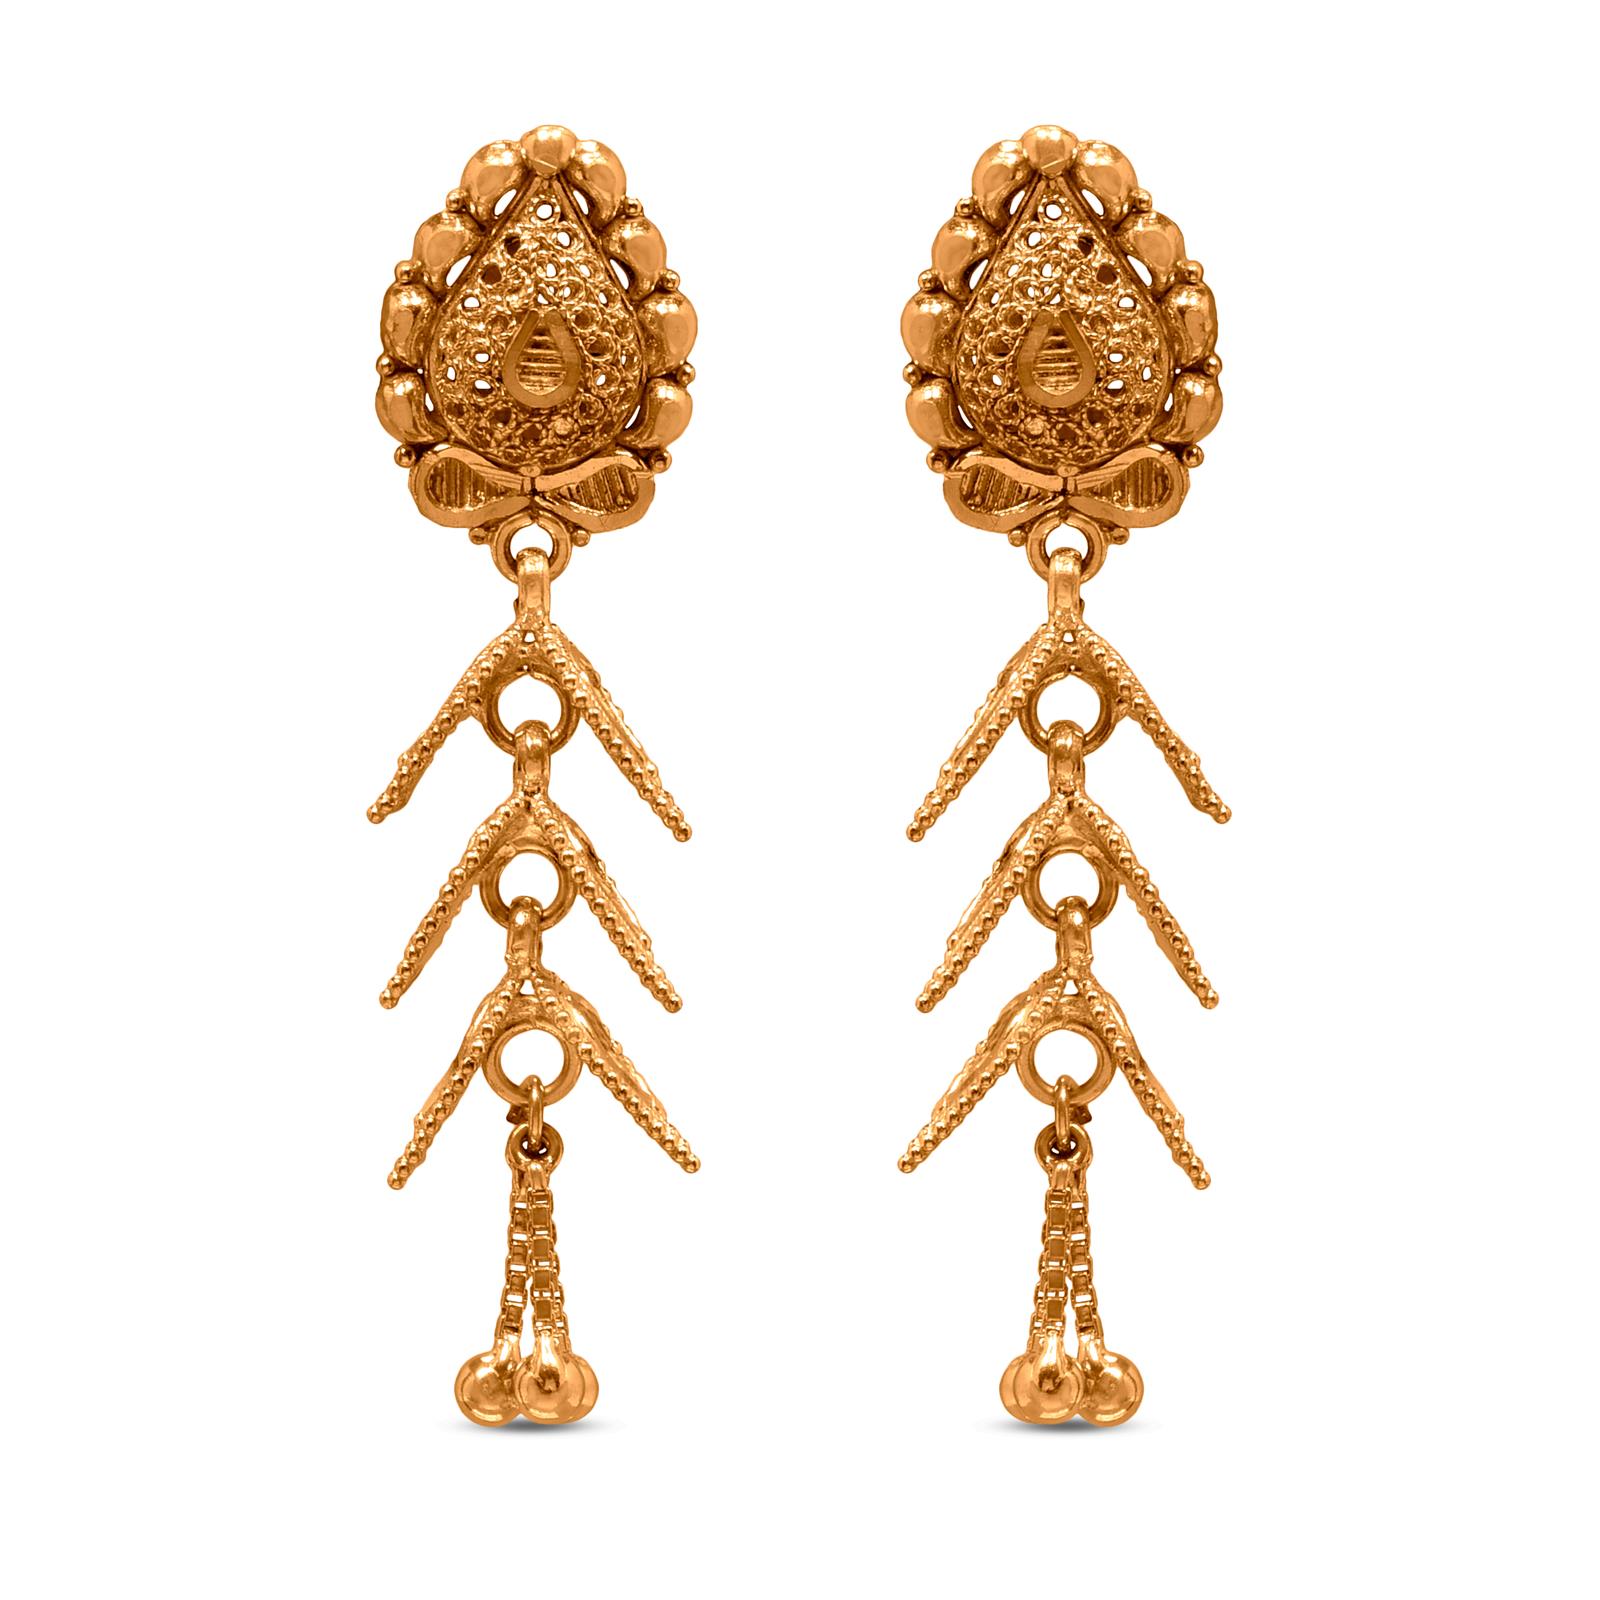 Buy 22Kt Gold Signity Buttalu Earrings 82VH9974 Online from Vaibhav  Jewellers